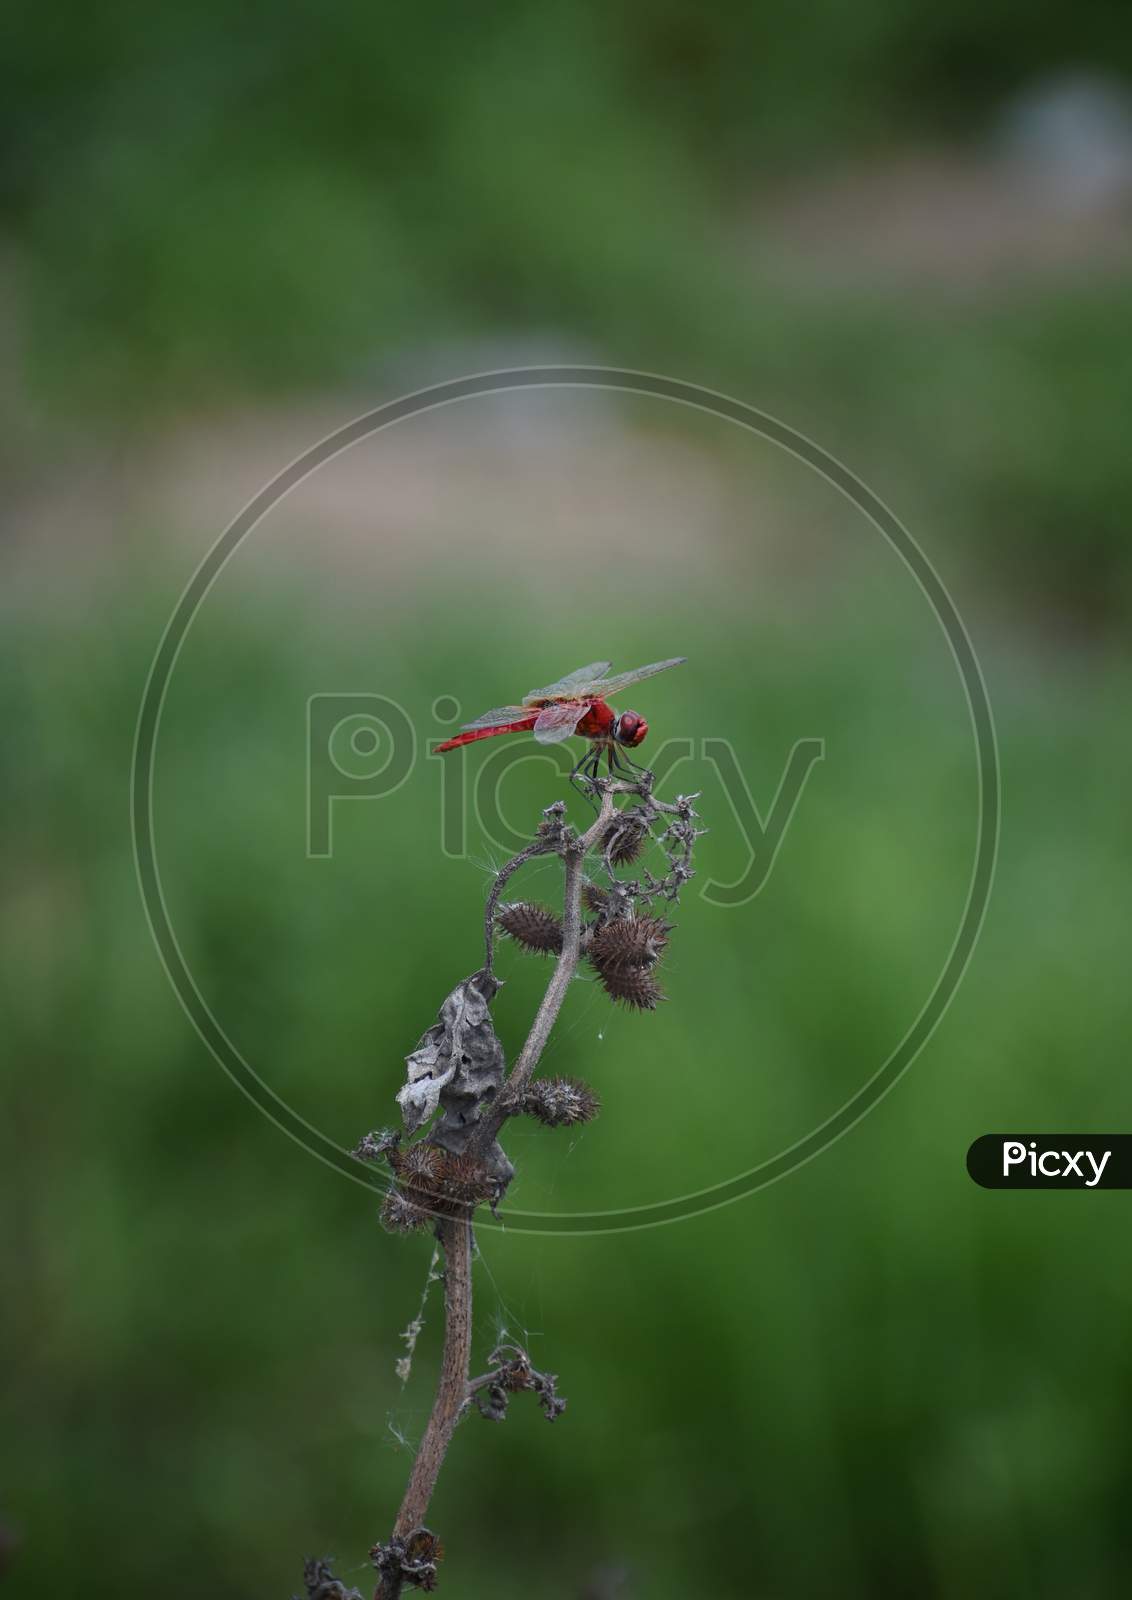 A red Dragonfly on the dry Branch of plant with blur background